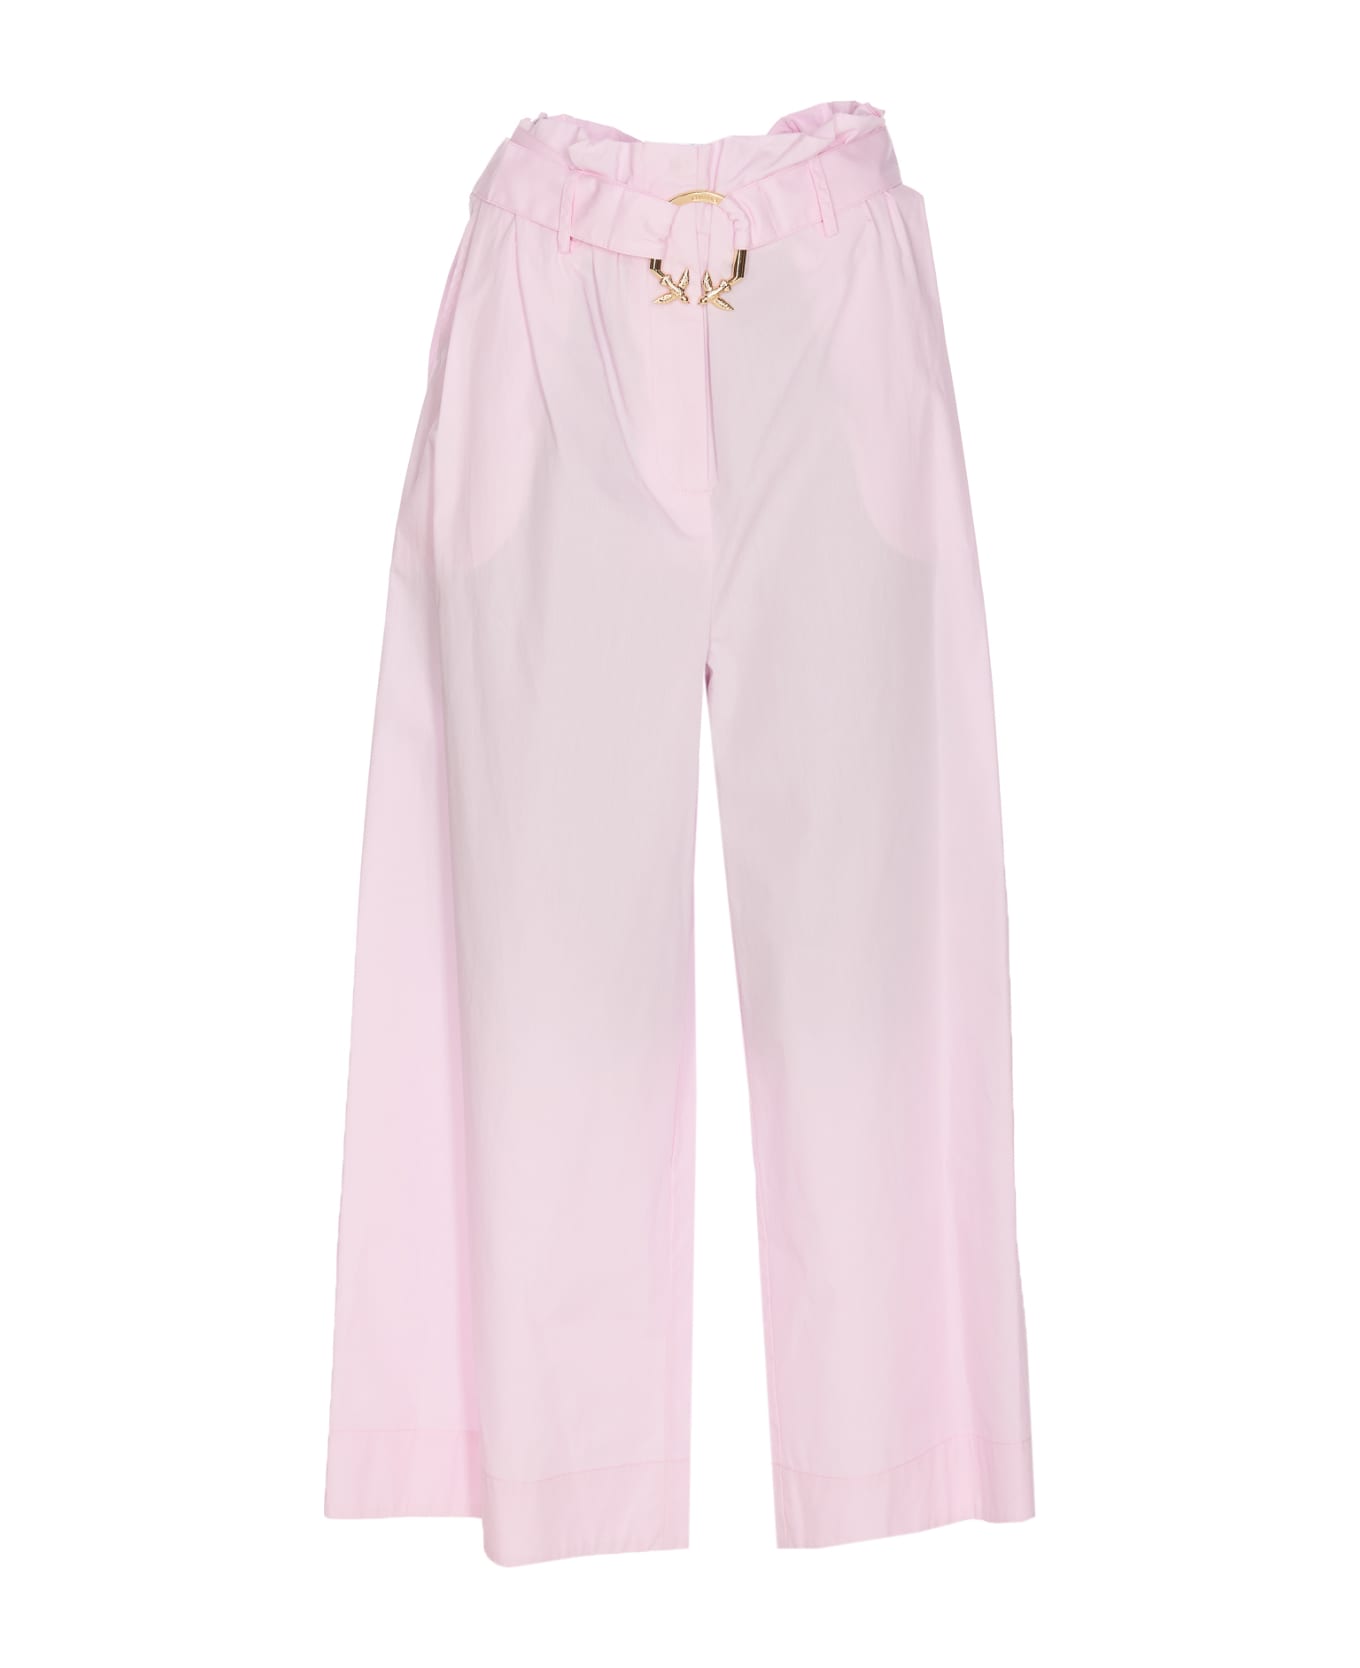 Pinko Wide Leg Pants With Trousers - Rosa dolce lilla ボトムス